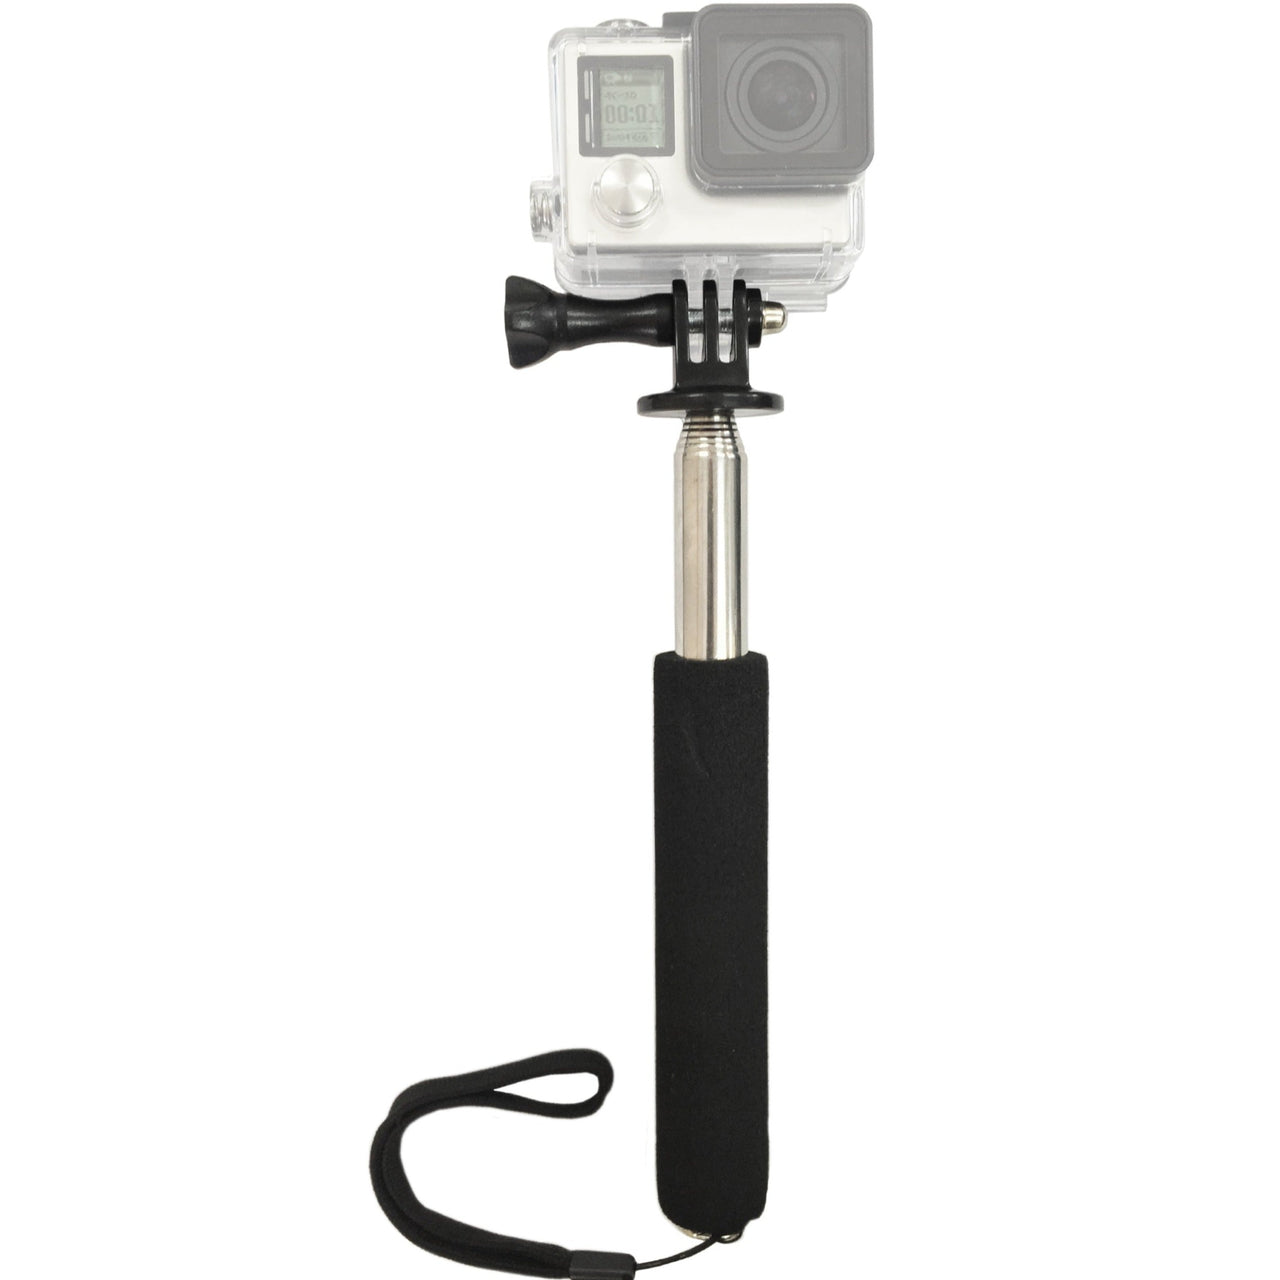 Xtreme Action Series Monopod for GoPro 2,3,4,5, LCD and Session